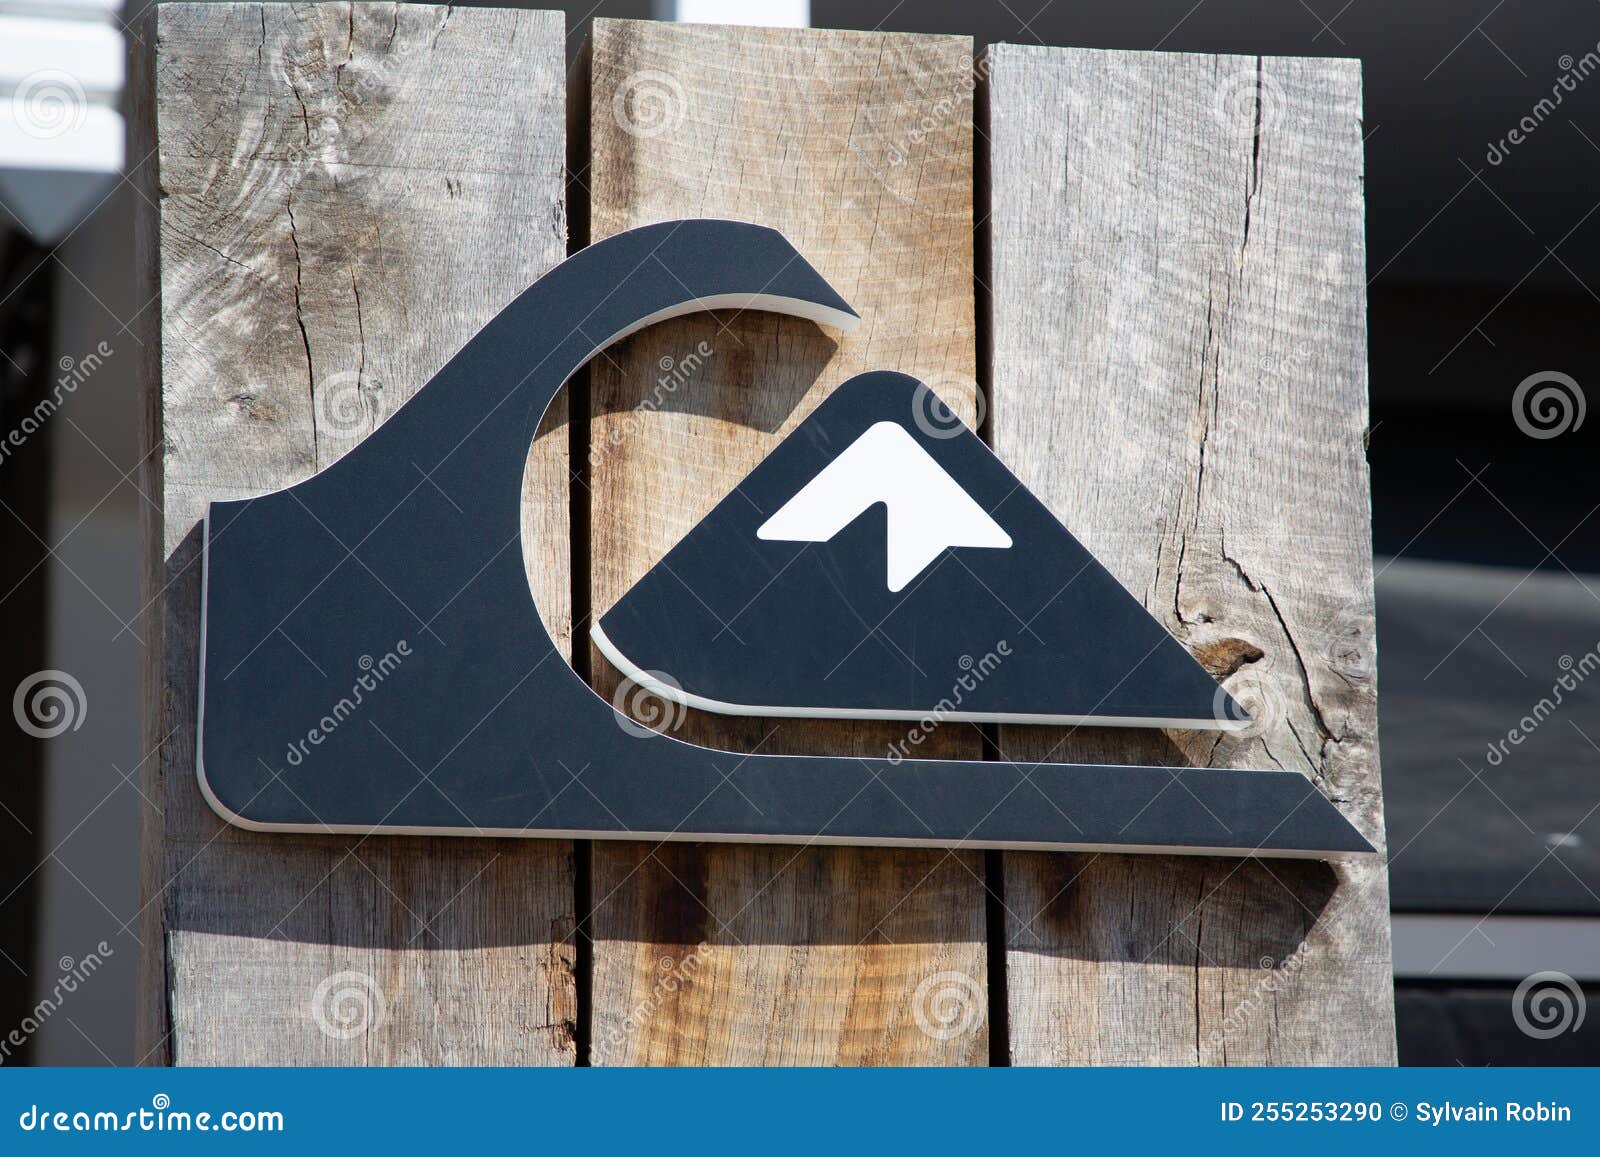 optillen weigeren klem Quiksilver Logo Sign and Brand Text on Wall Store Facade Clothing Shop Surf  Board Editorial Image - Image of clothing, city: 255253290